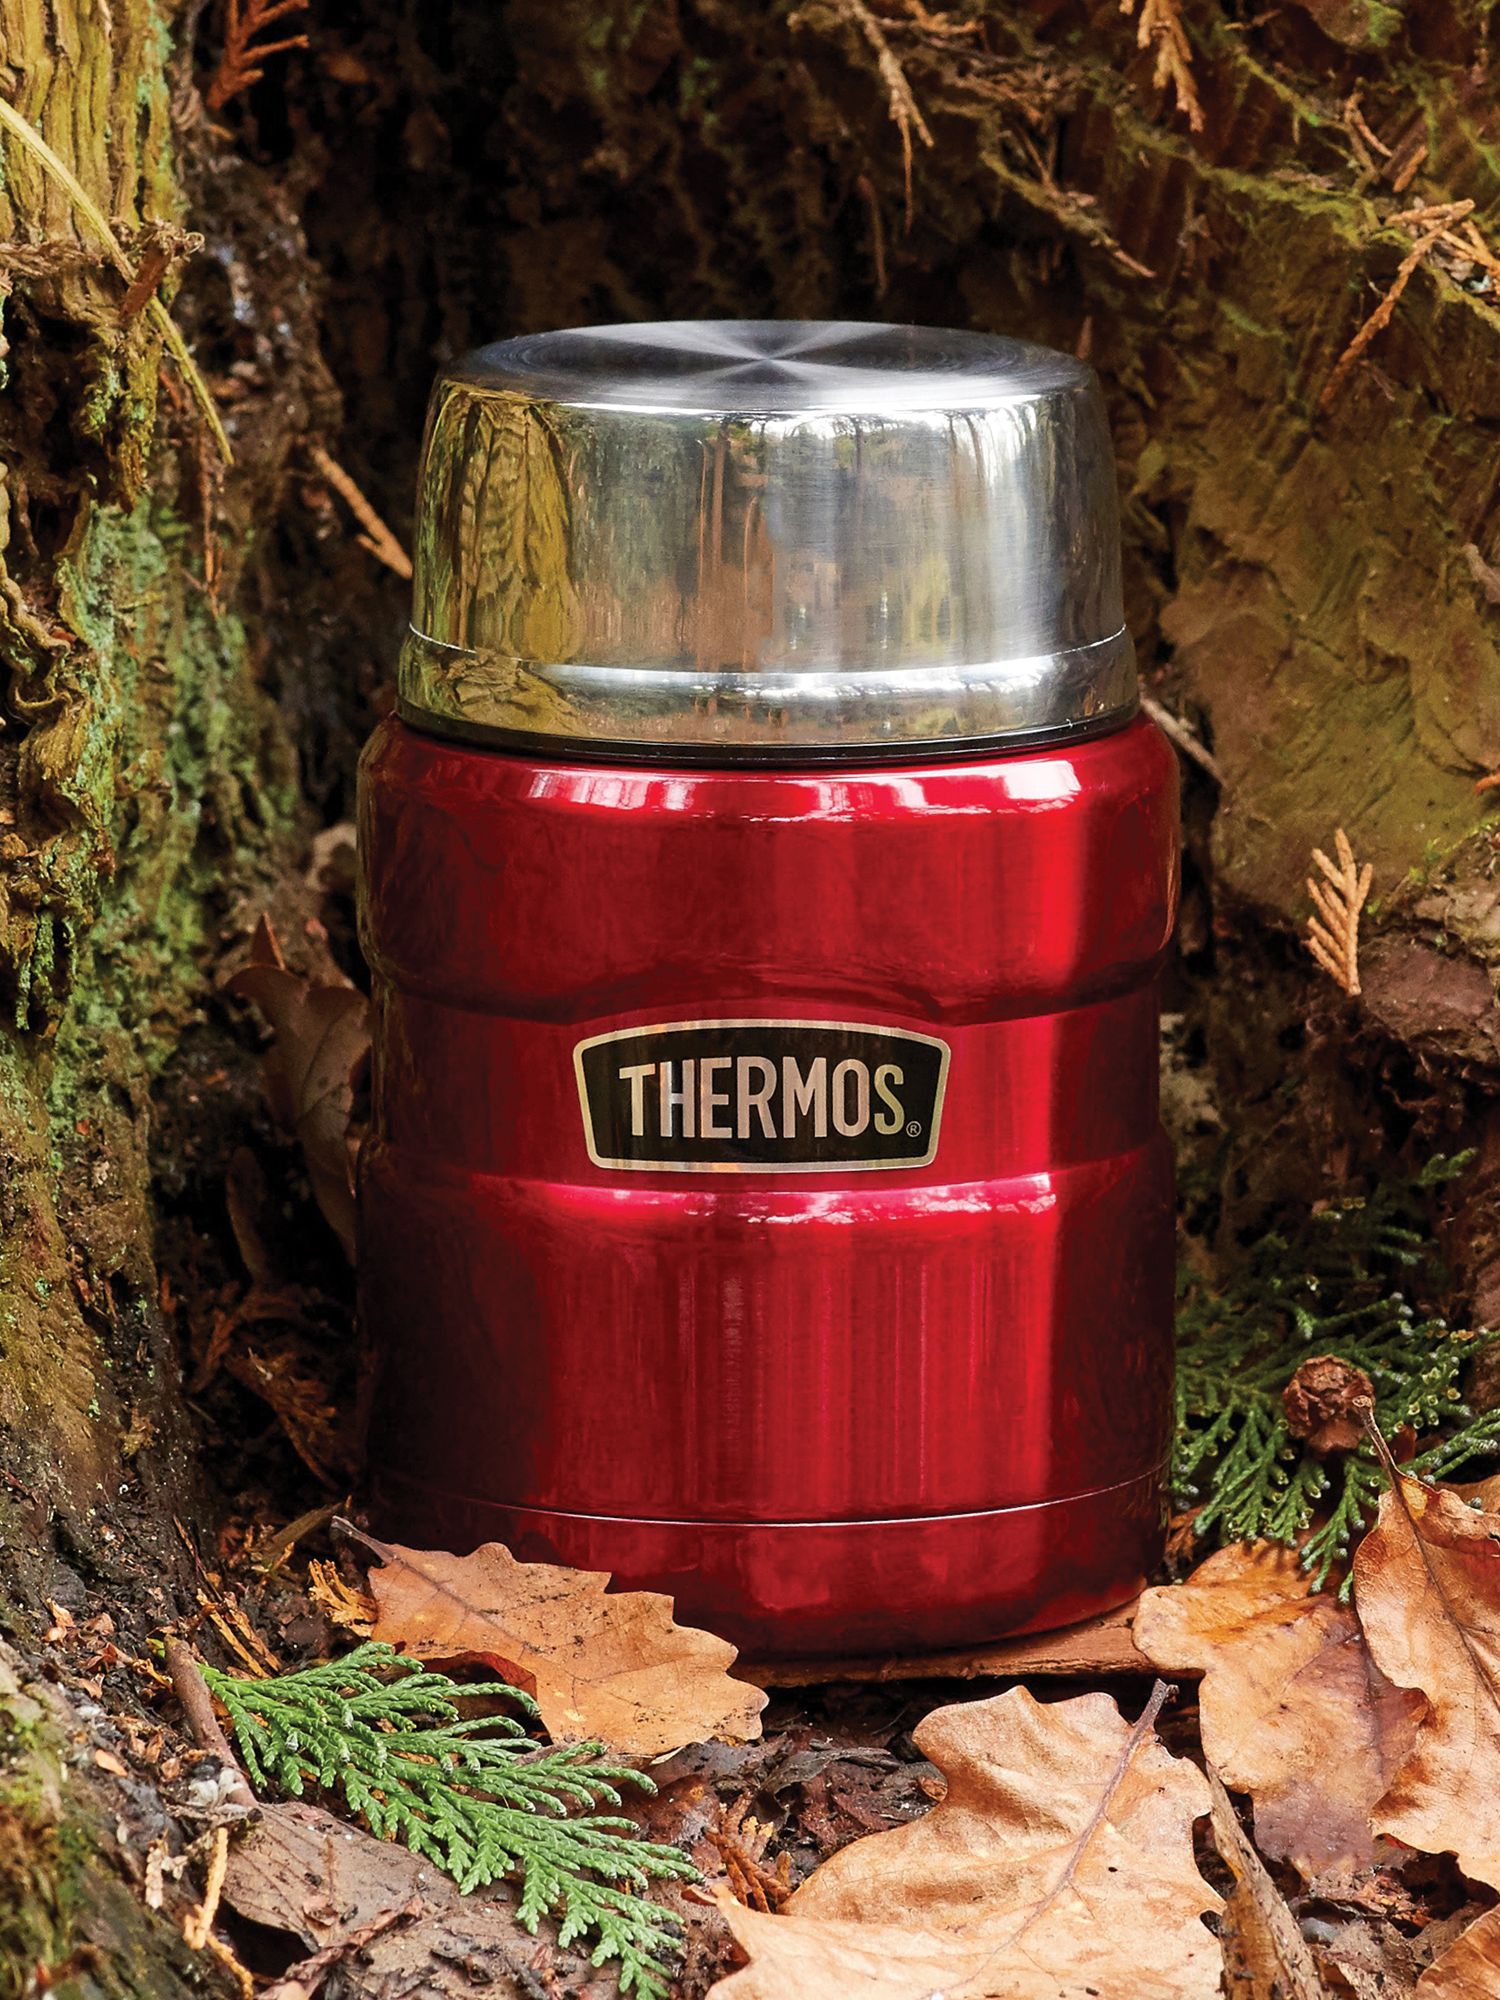 Thermos 470ml Stainless Steel Flask - Red